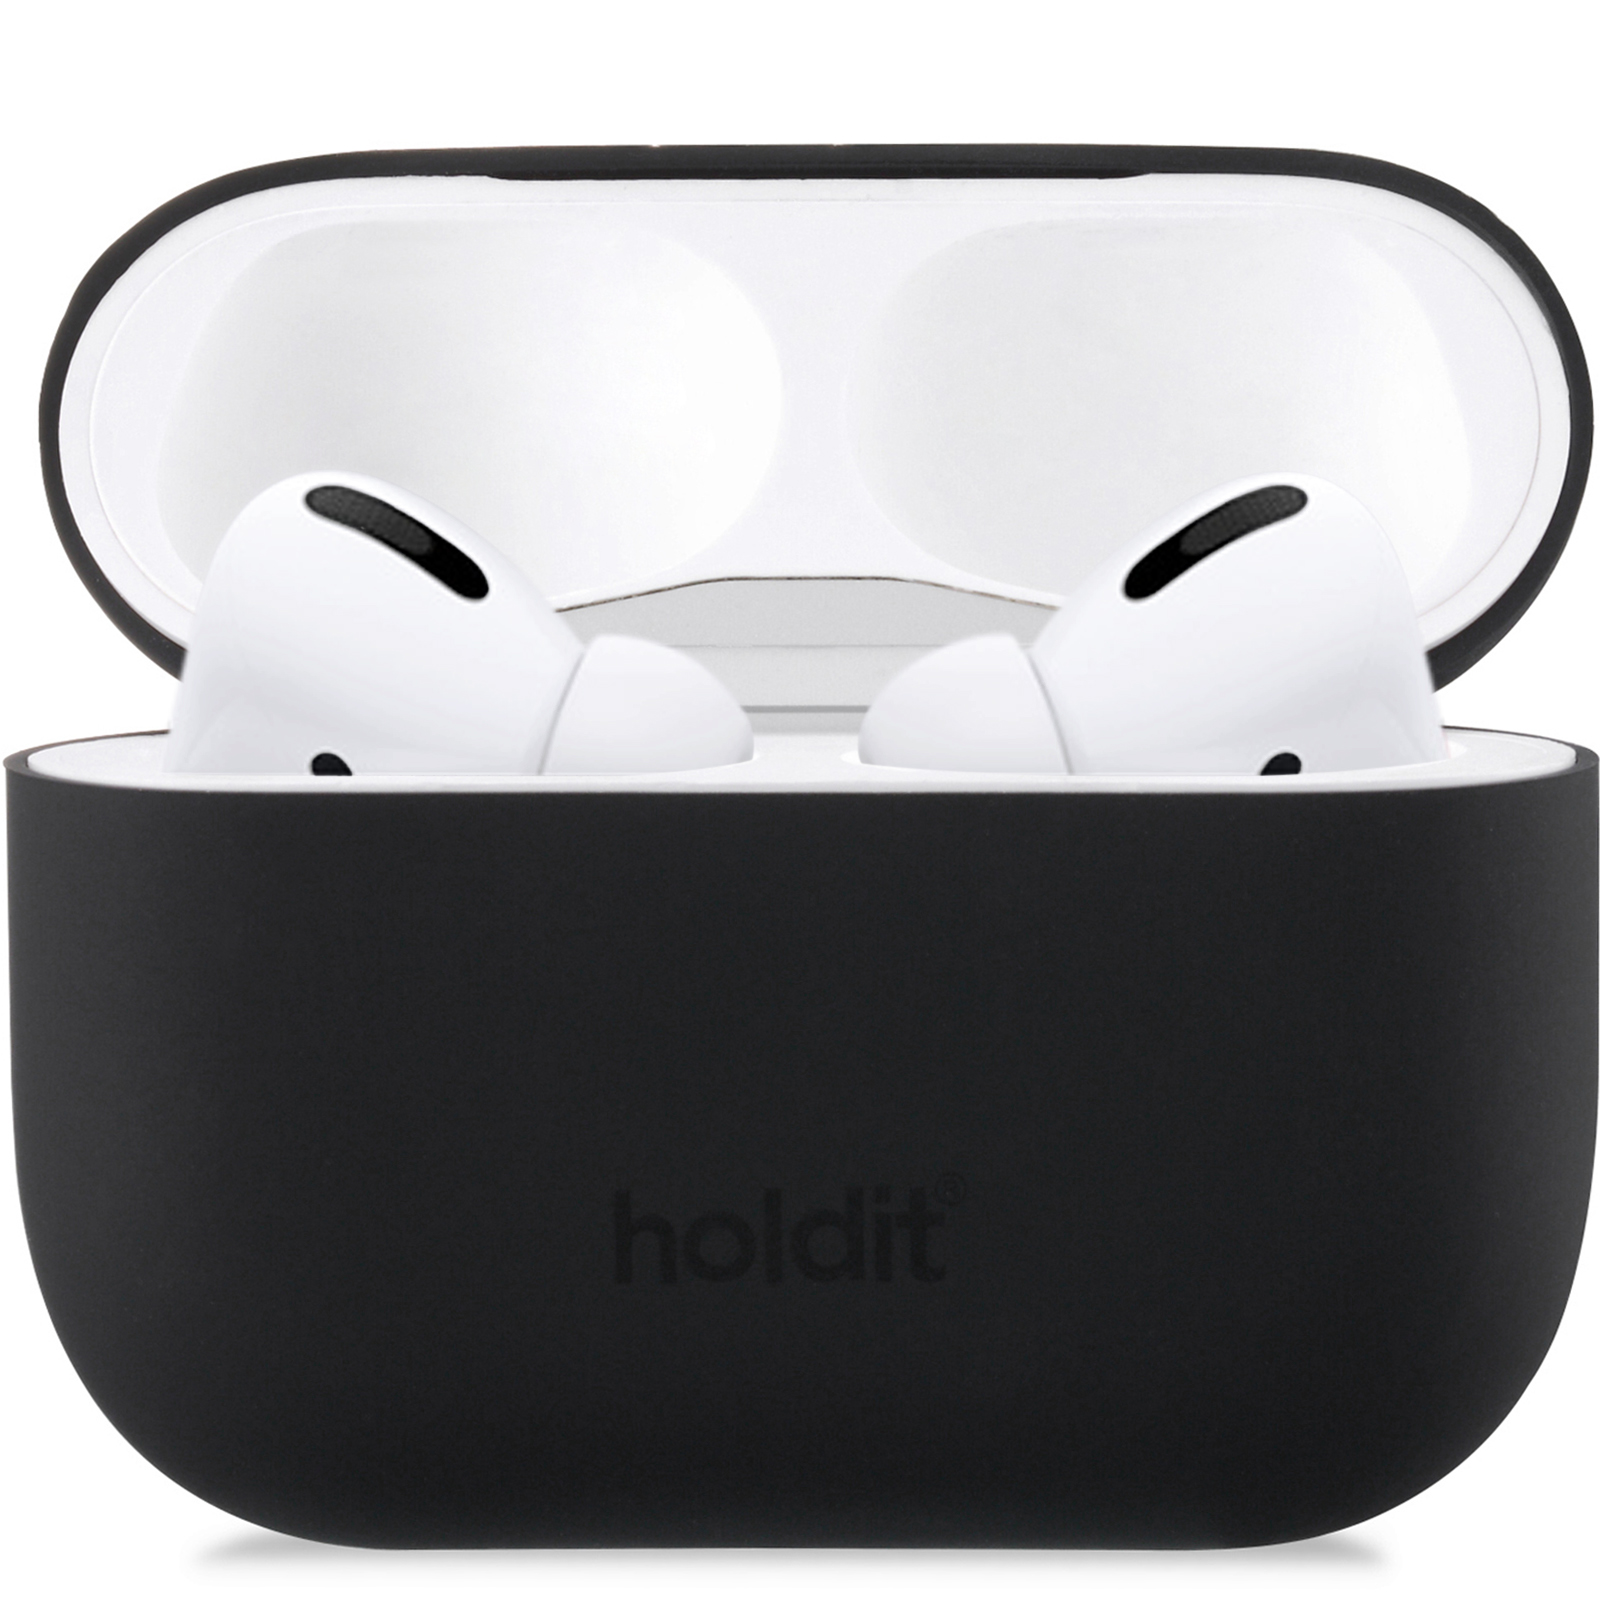 Airpods Pro, housse silicone, noir